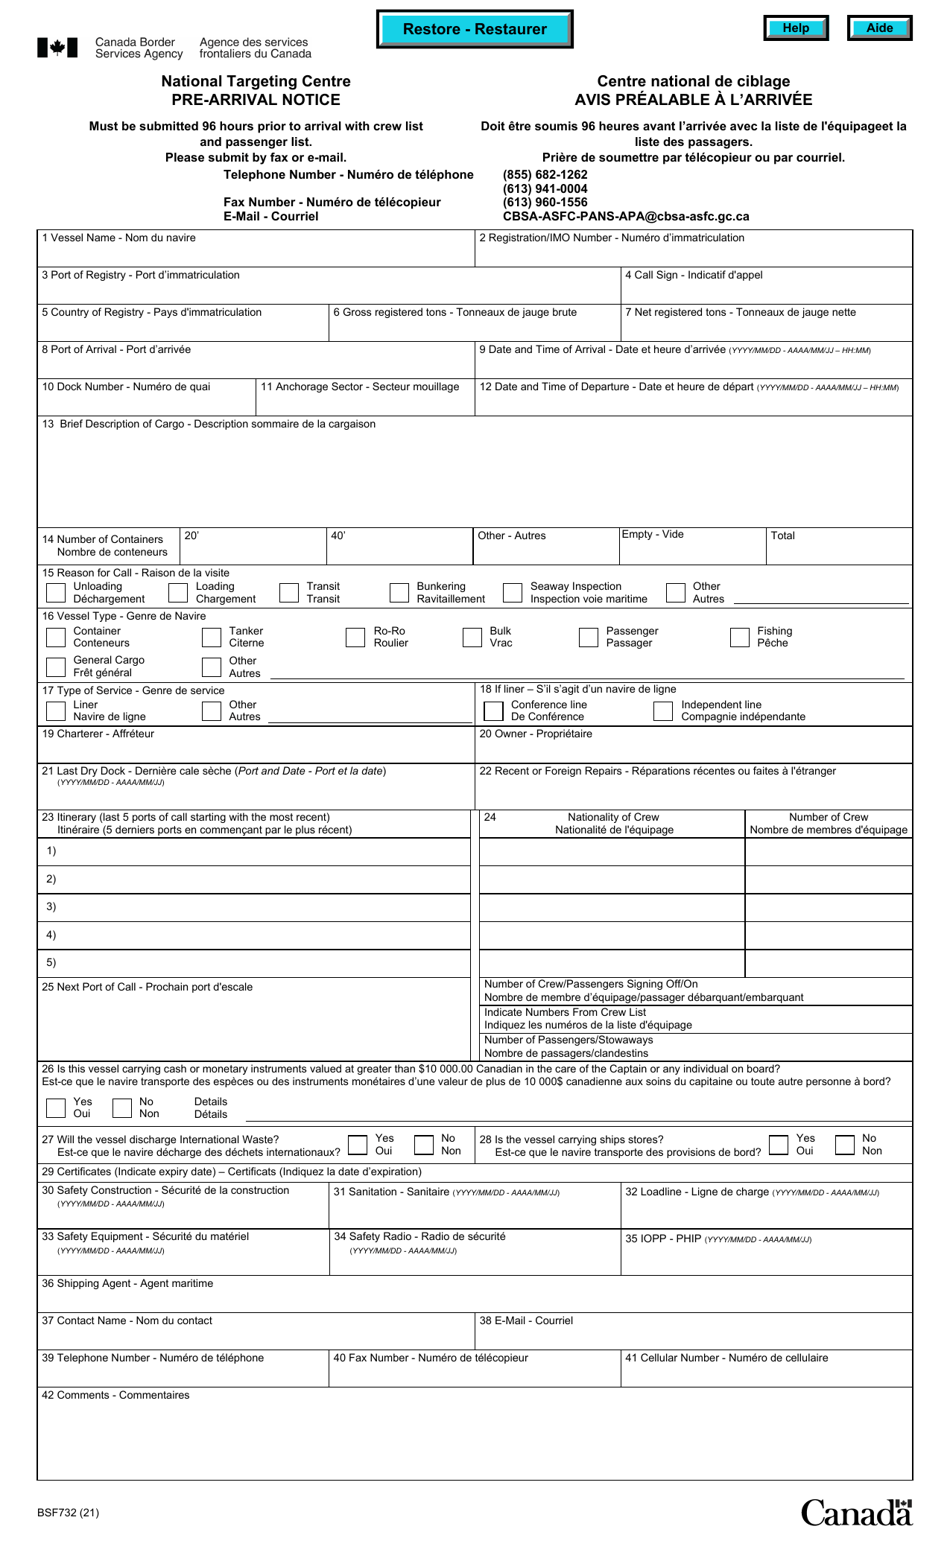 Form BSF732 National Targeting Centre - Pre-arrival Notice - Canada (English / French), Page 1